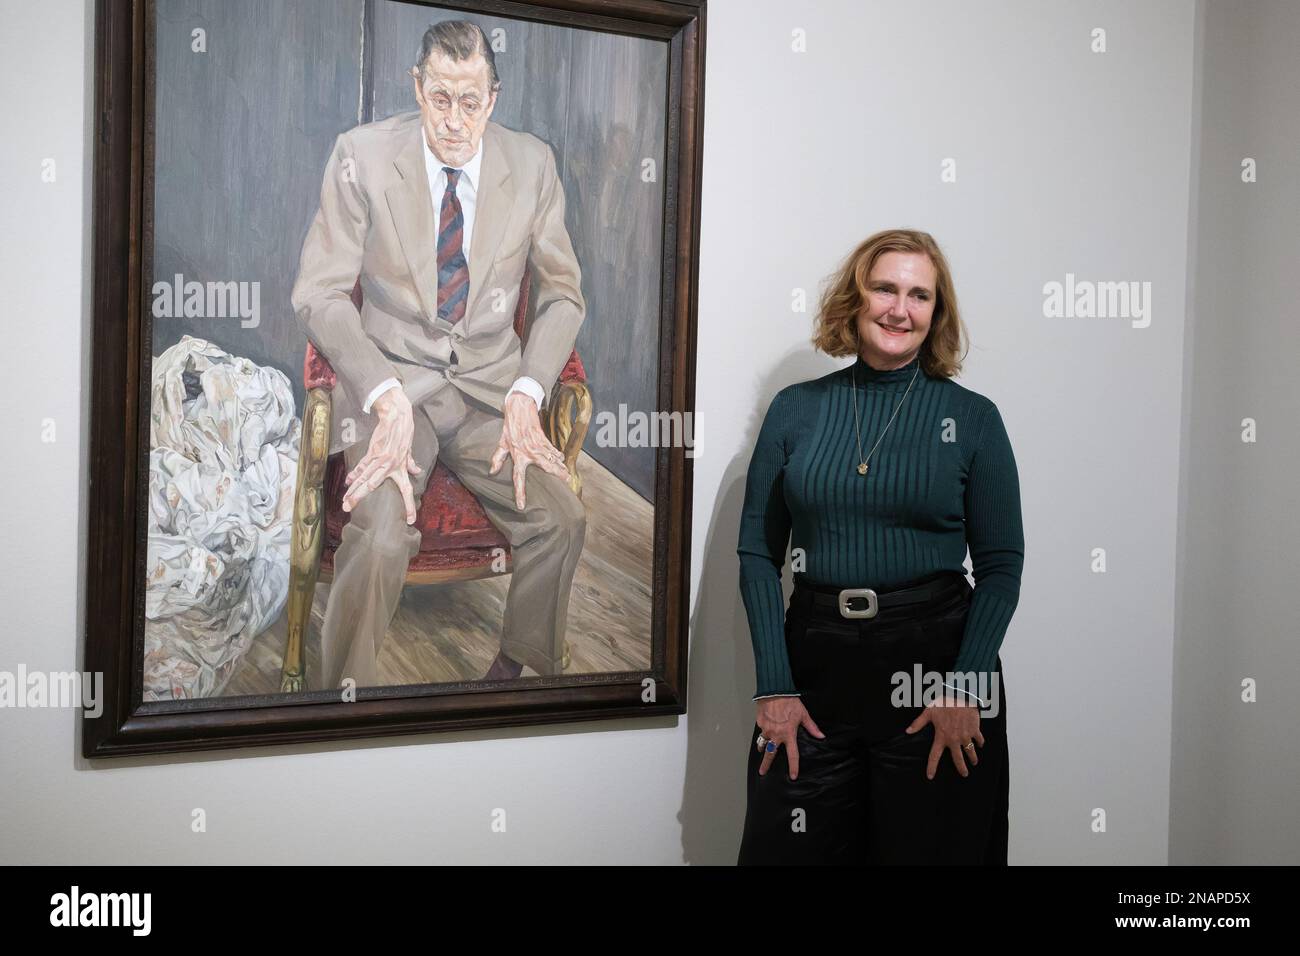 Francesca Thyssen-Bornemisza poses next to the painting 'man in a chair (portrait of Baron Thyssen)' during the presentation of the Lucian Freud exhibition at the Thyssen-Bornemisza museum in Madrid. Stock Photo